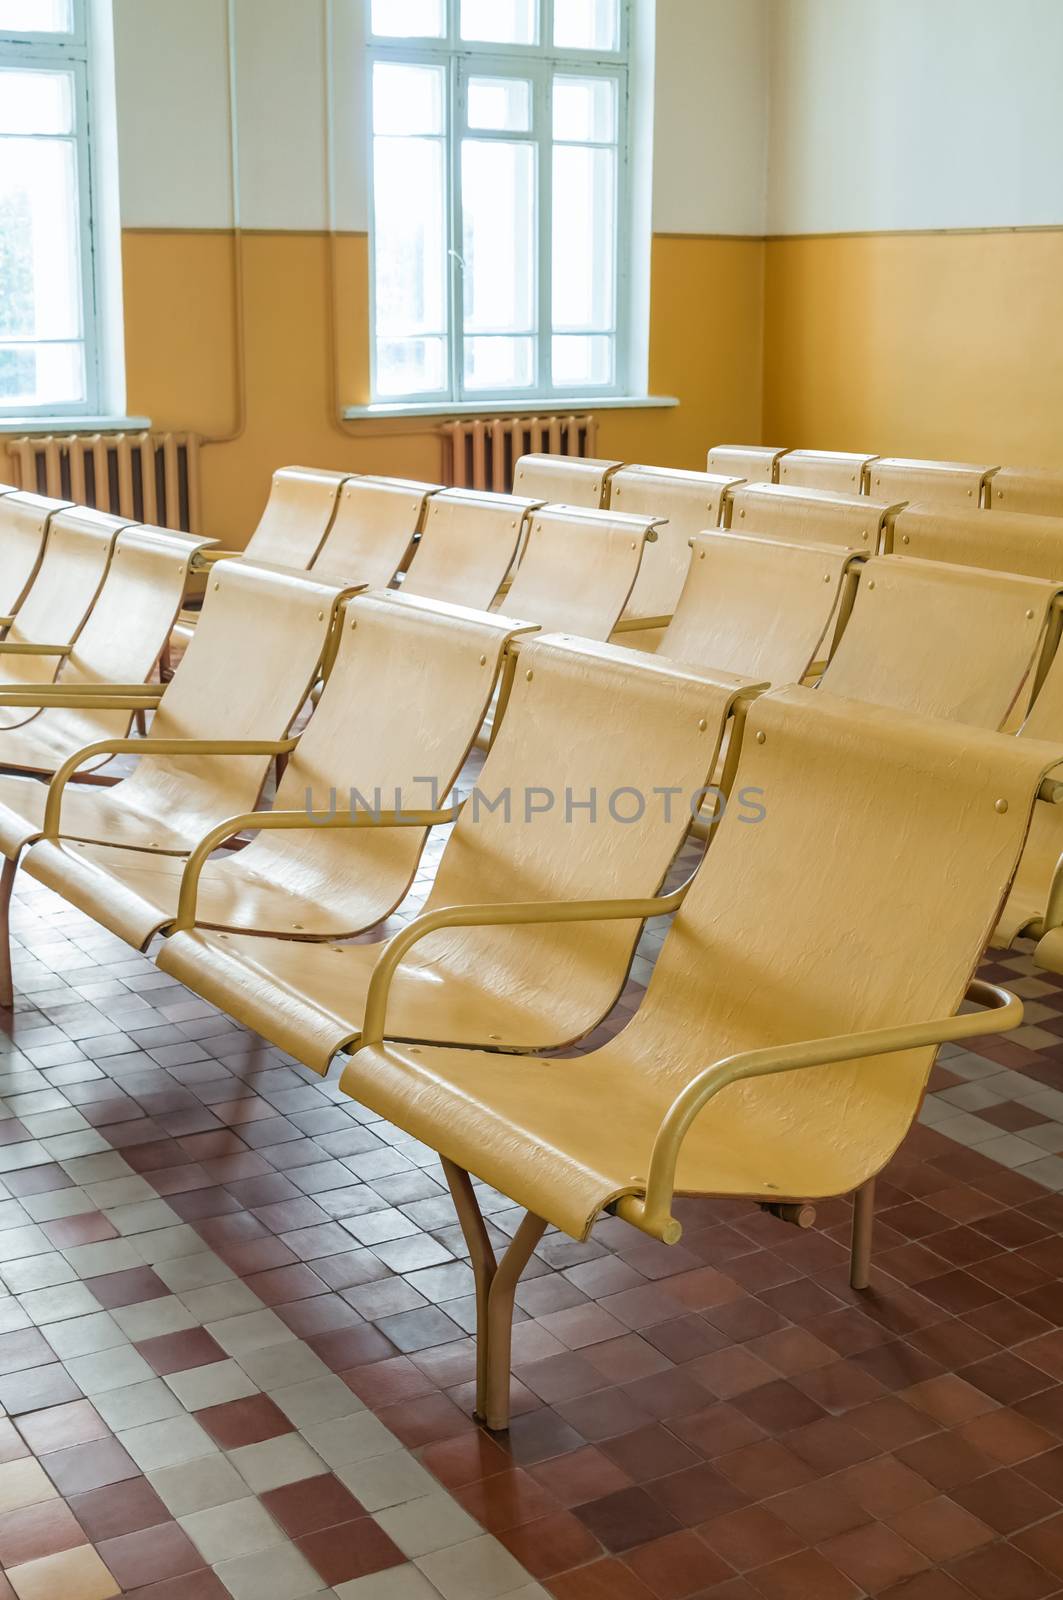 Old railway station waiting room with empty chairs.